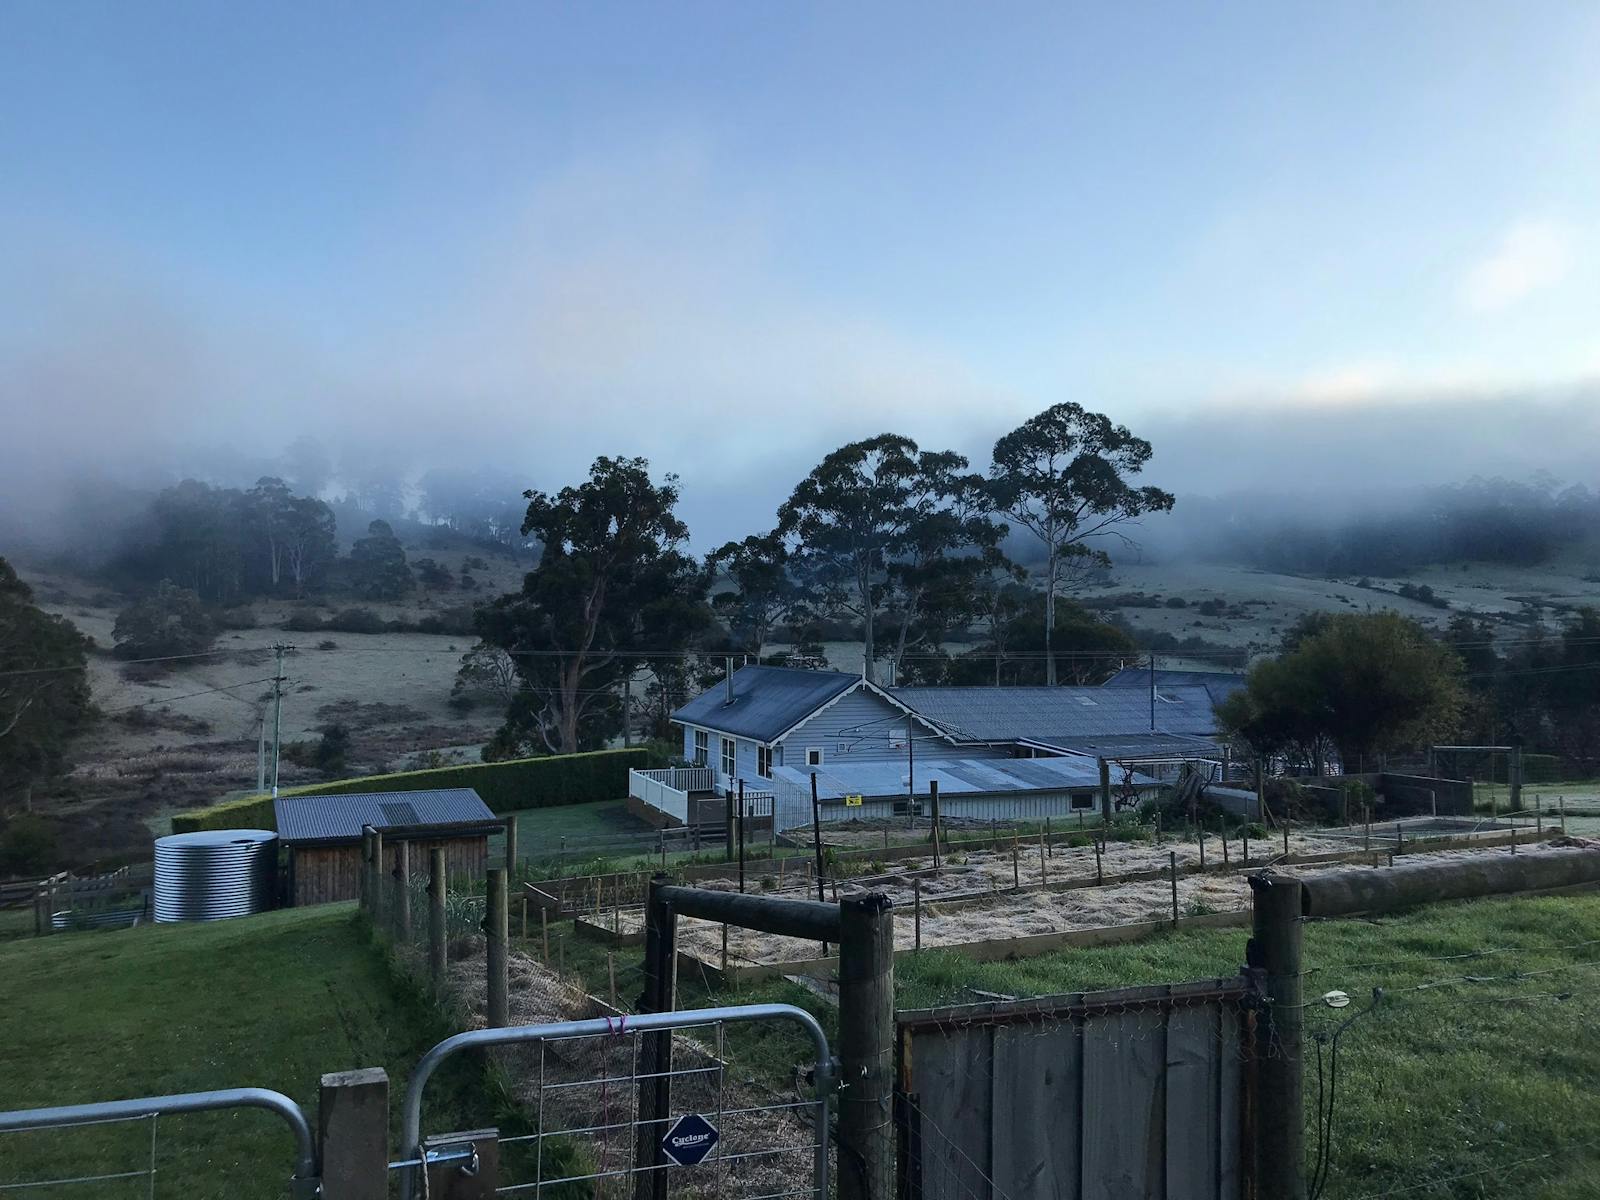 Morning fog, Homestead in the distant with paddocks and sheds.